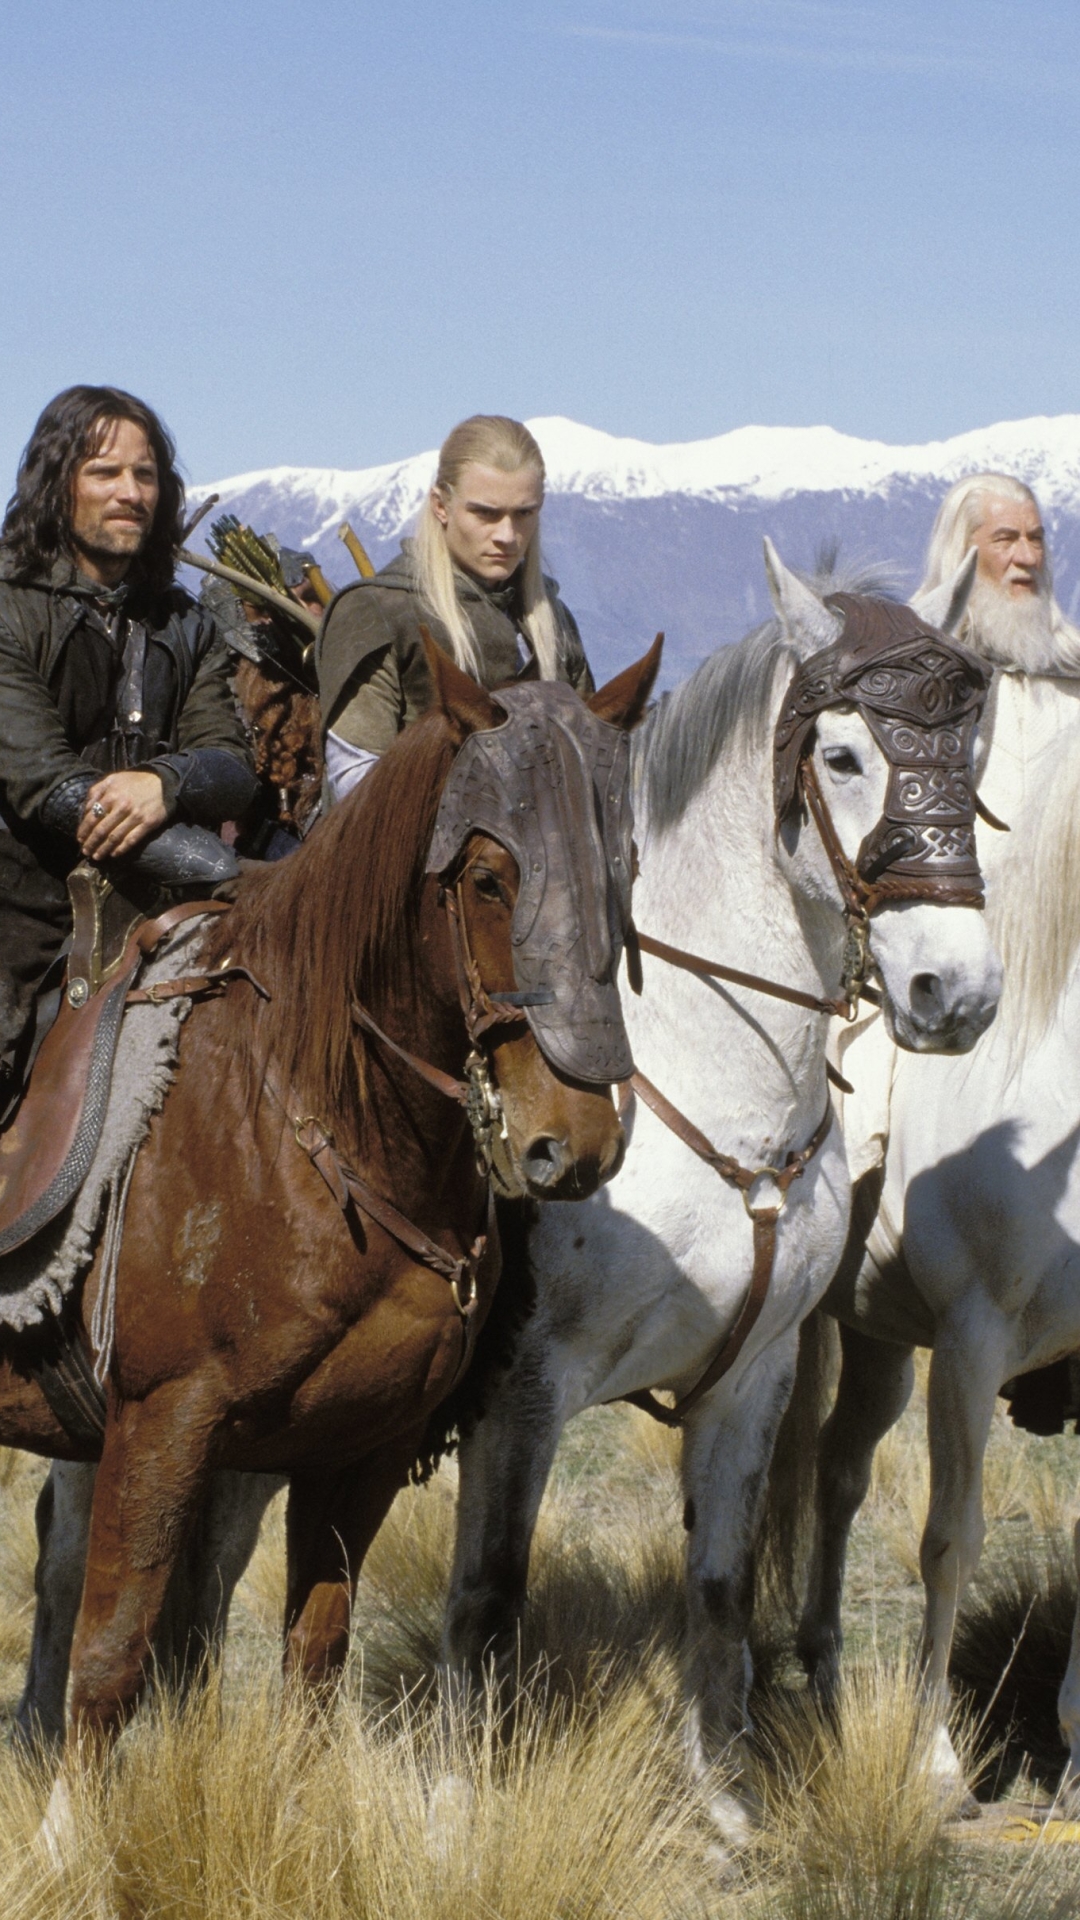 legolas, movie, the lord of the rings: the two towers, orlando bloom, ian mckellen, viggo mortensen, gandalf, aragorn, the lord of the rings